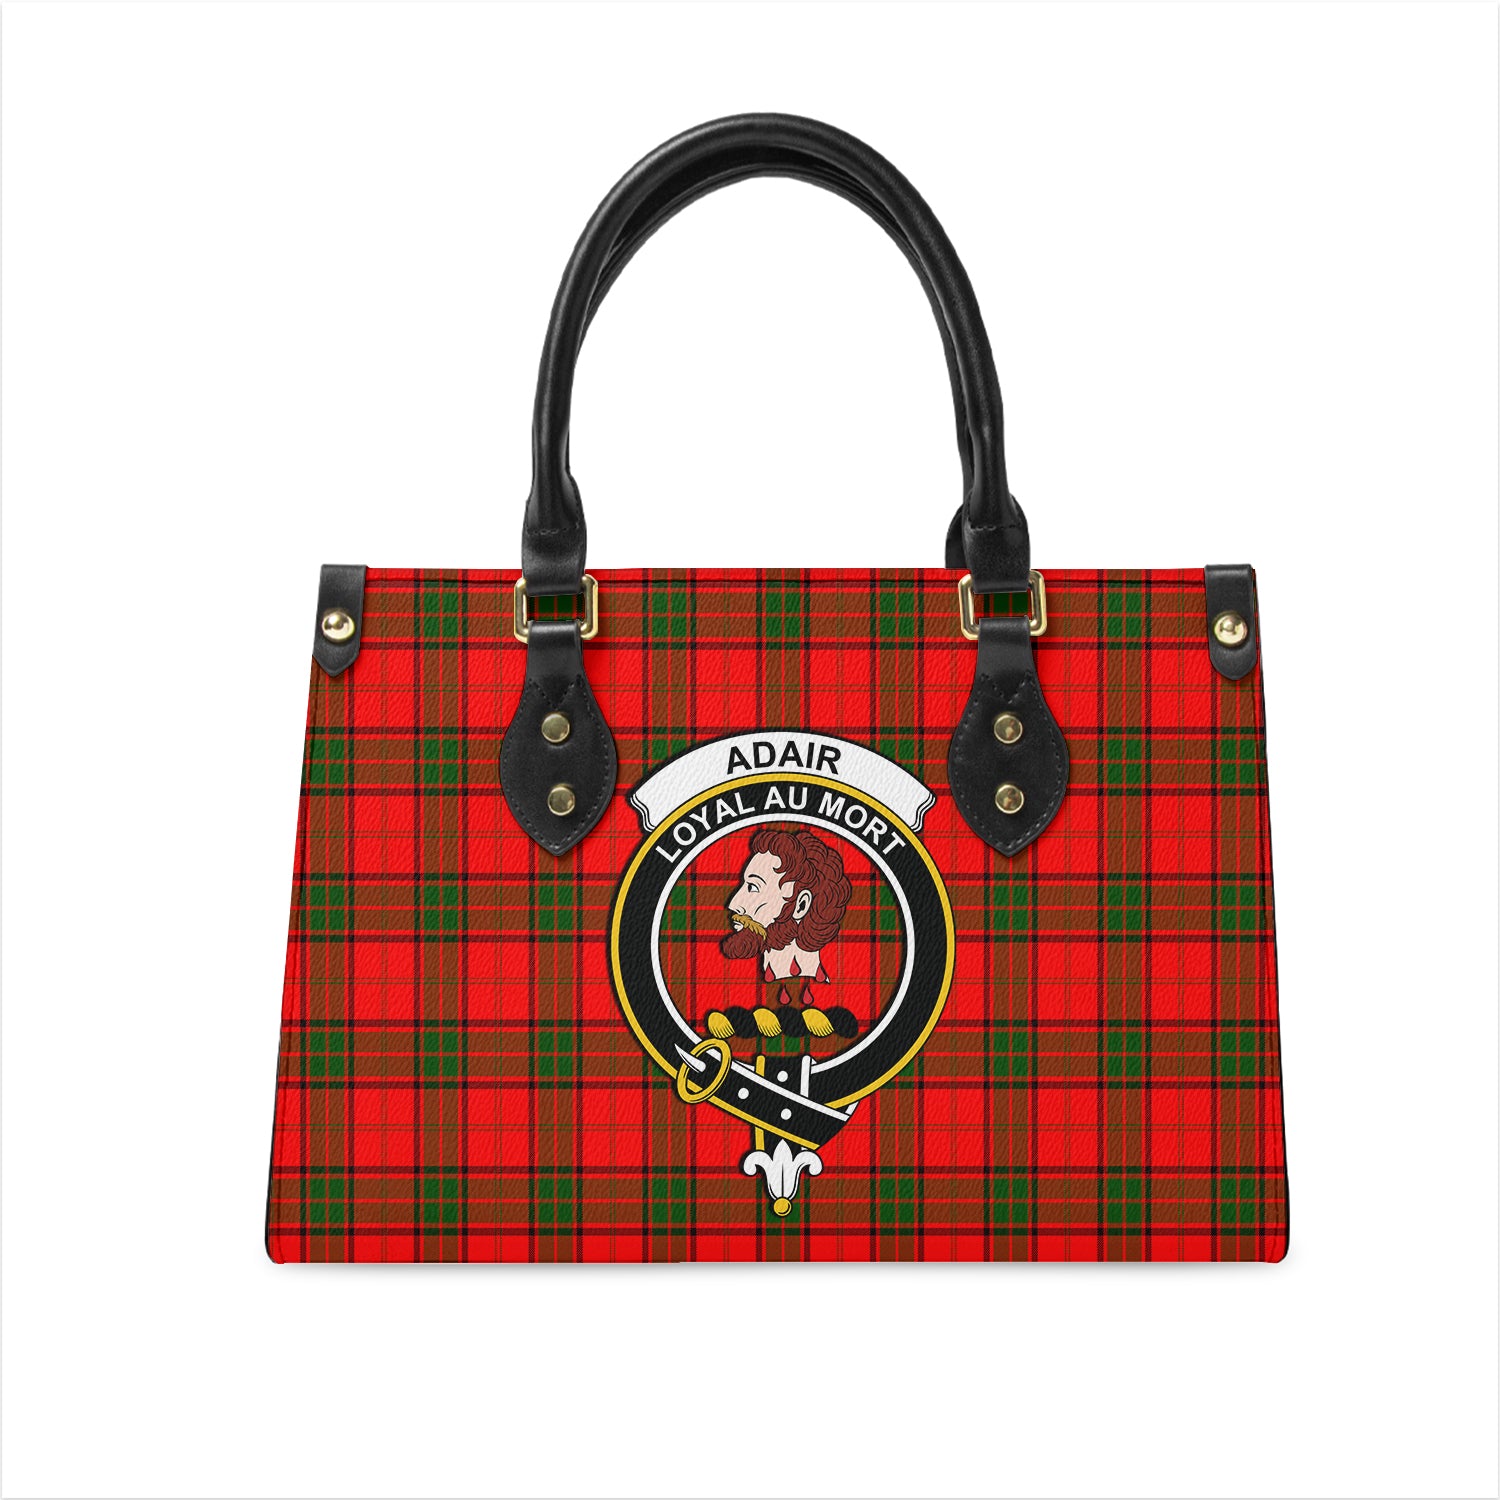 Adair Tartan Leather Bag with Family Crest One Size 29*11*20 cm - Tartanvibesclothing